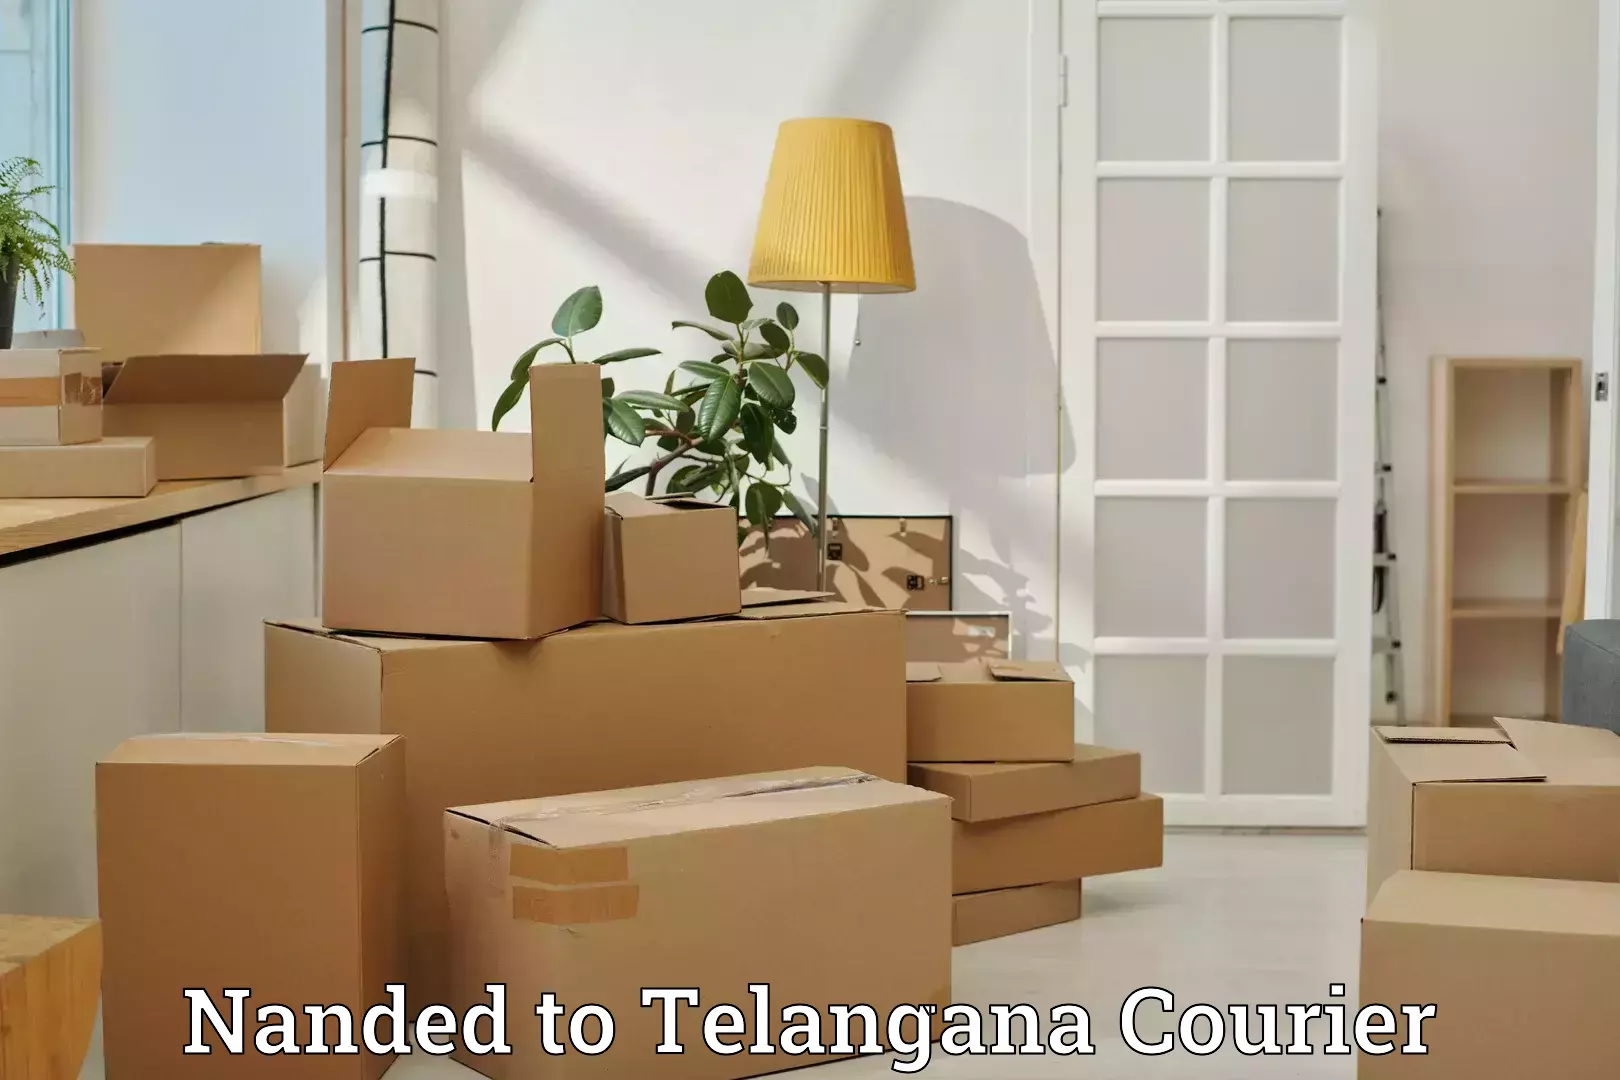 Luggage transport consultancy Nanded to Yerrupalem